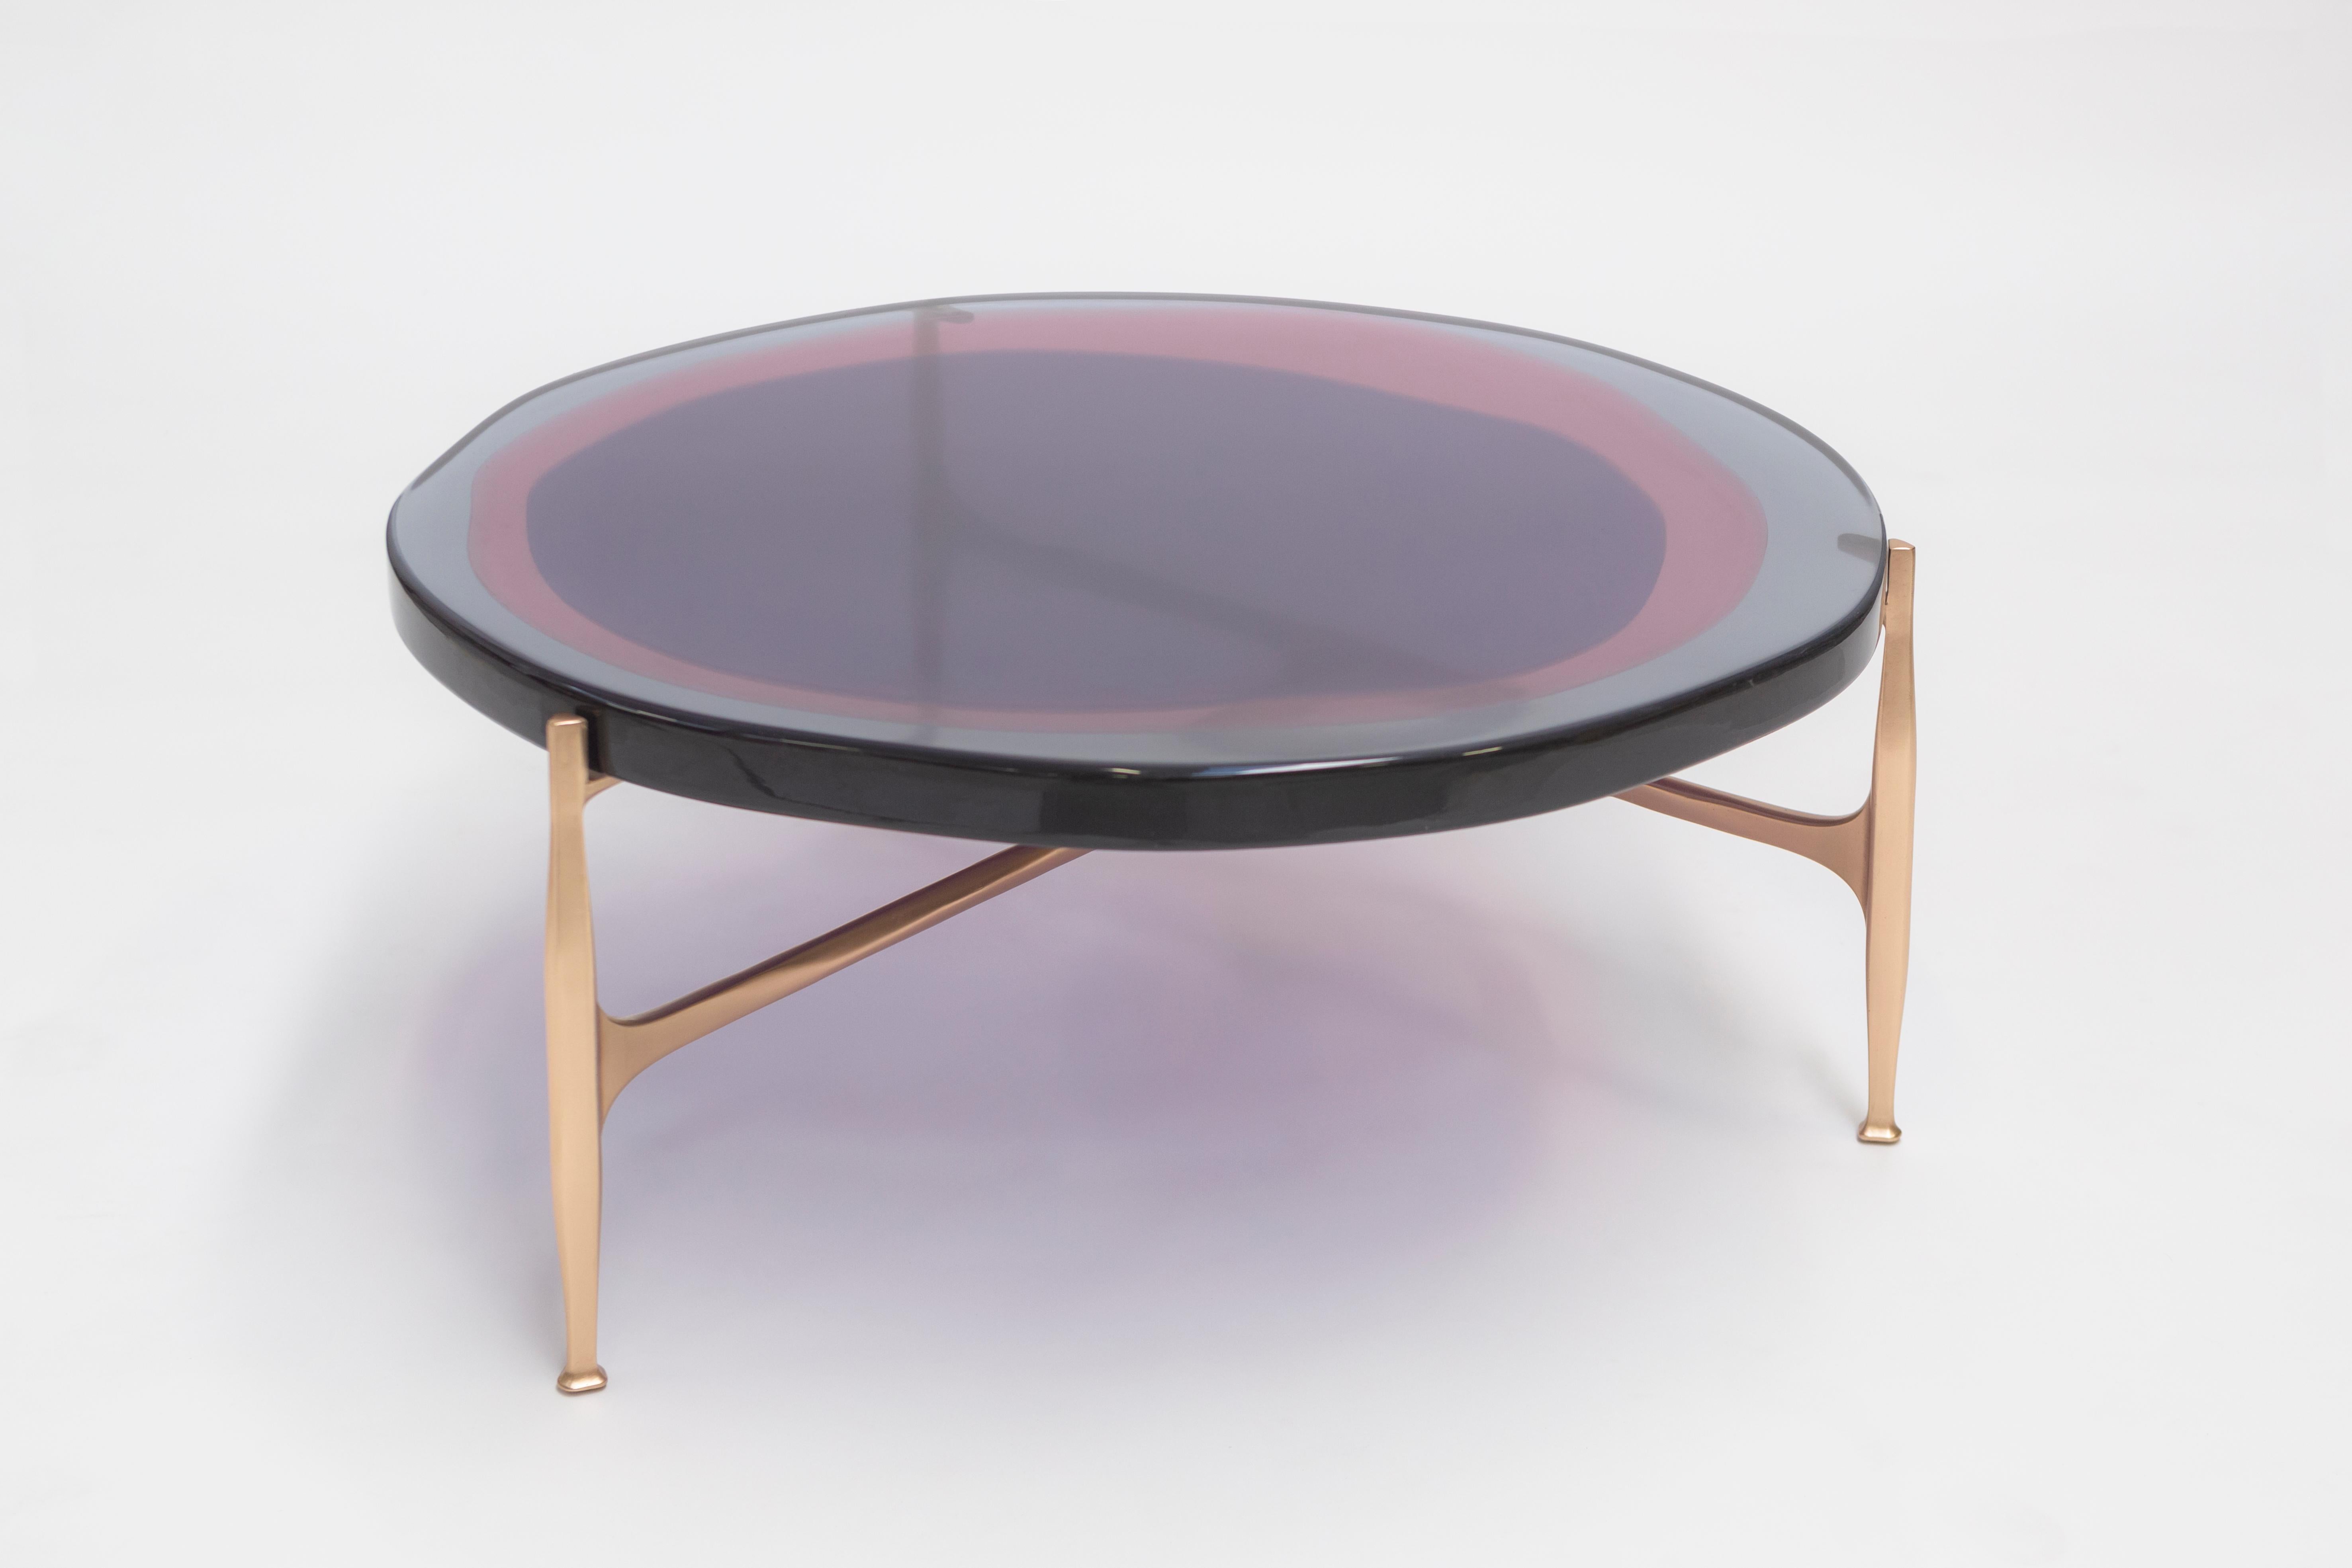 With an irregular circular top crafted from transparent and colorful resin, arranged in a staggered pattern on a bronze frame, this table plays with light. The production process entails a specialized resin-casting technique. The material is layered